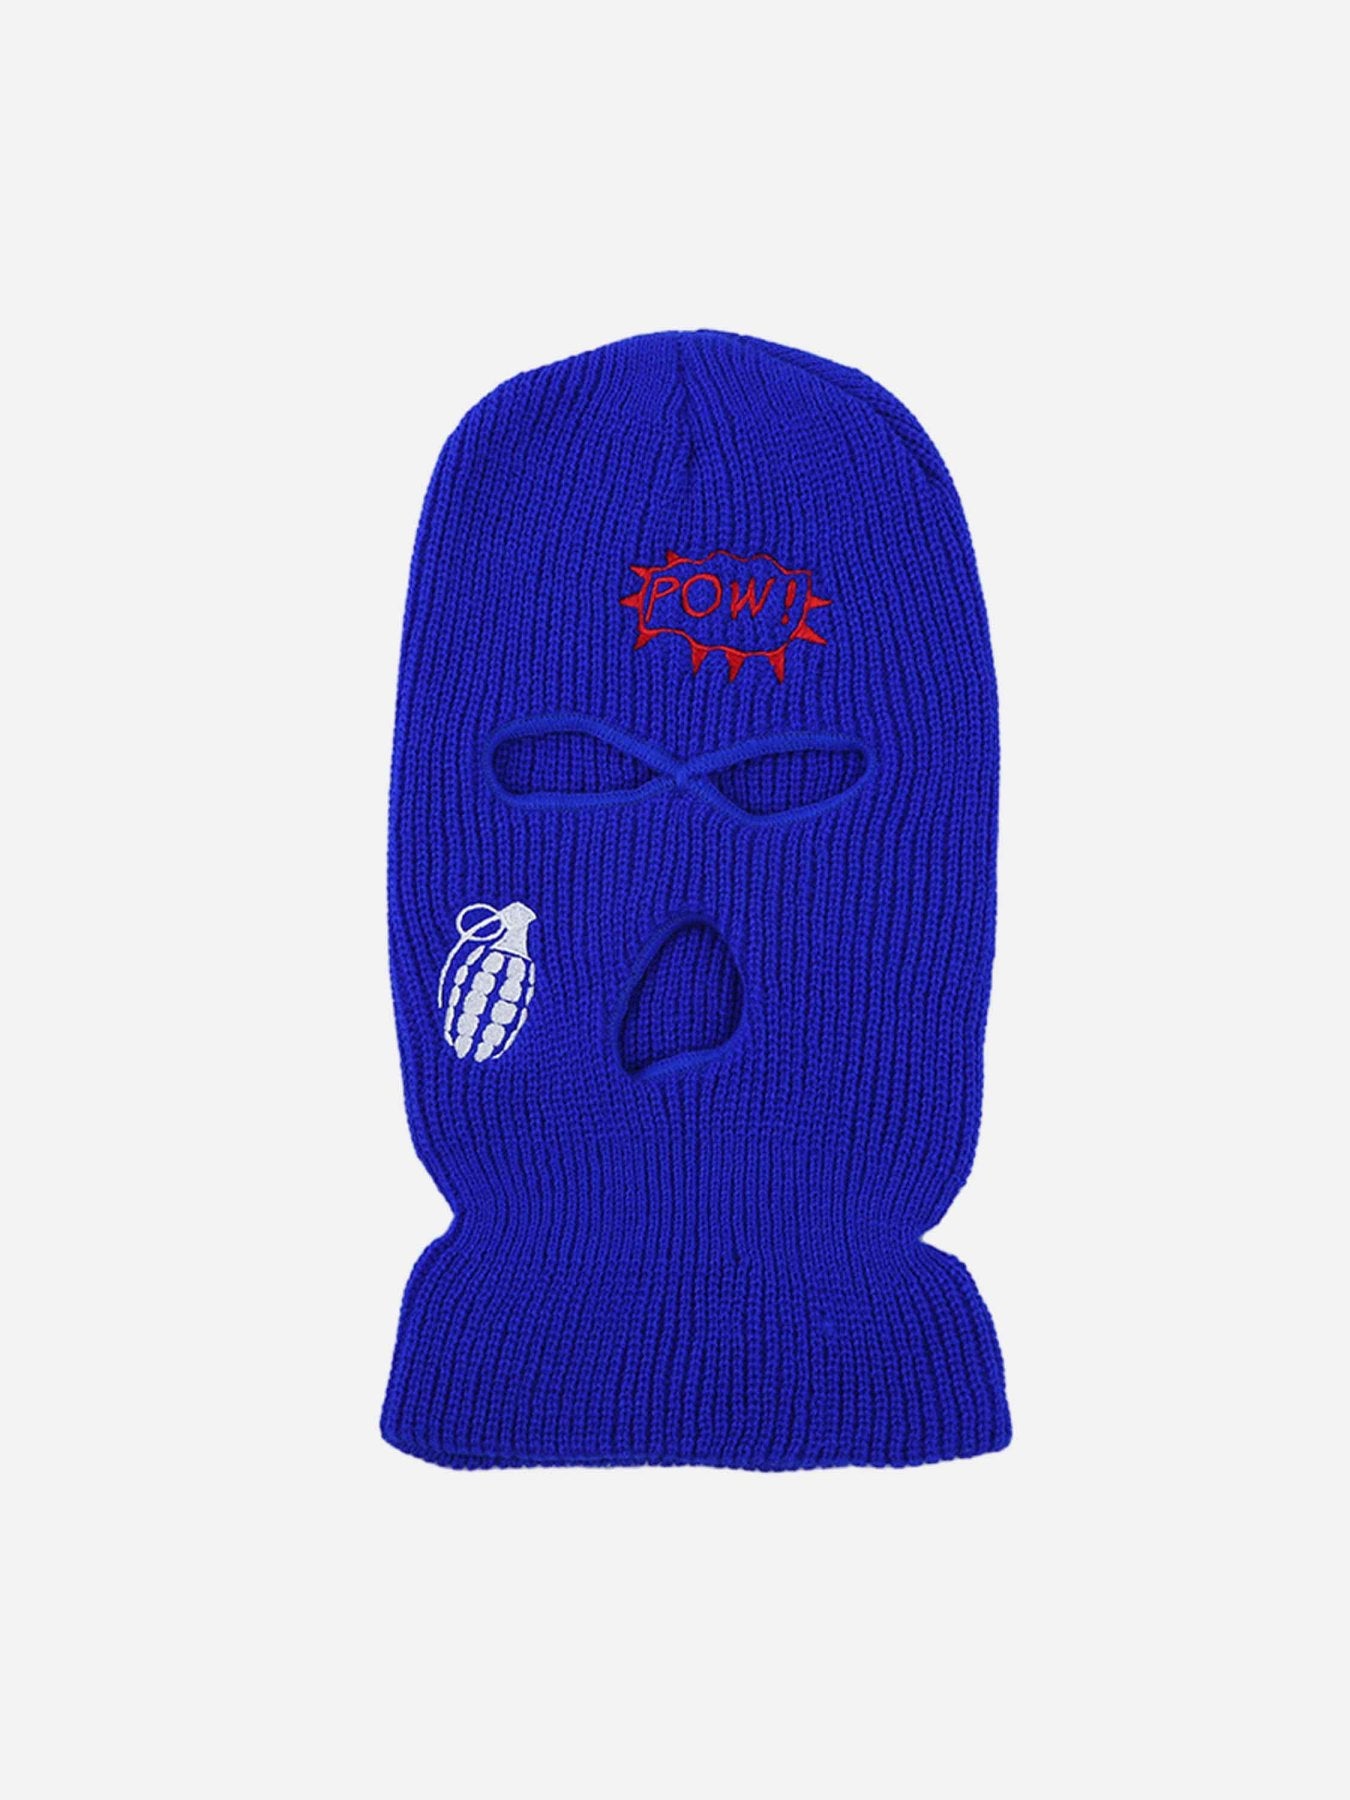 The Supermade Hip Hop Graffiti Couple Trendy Knit Hat